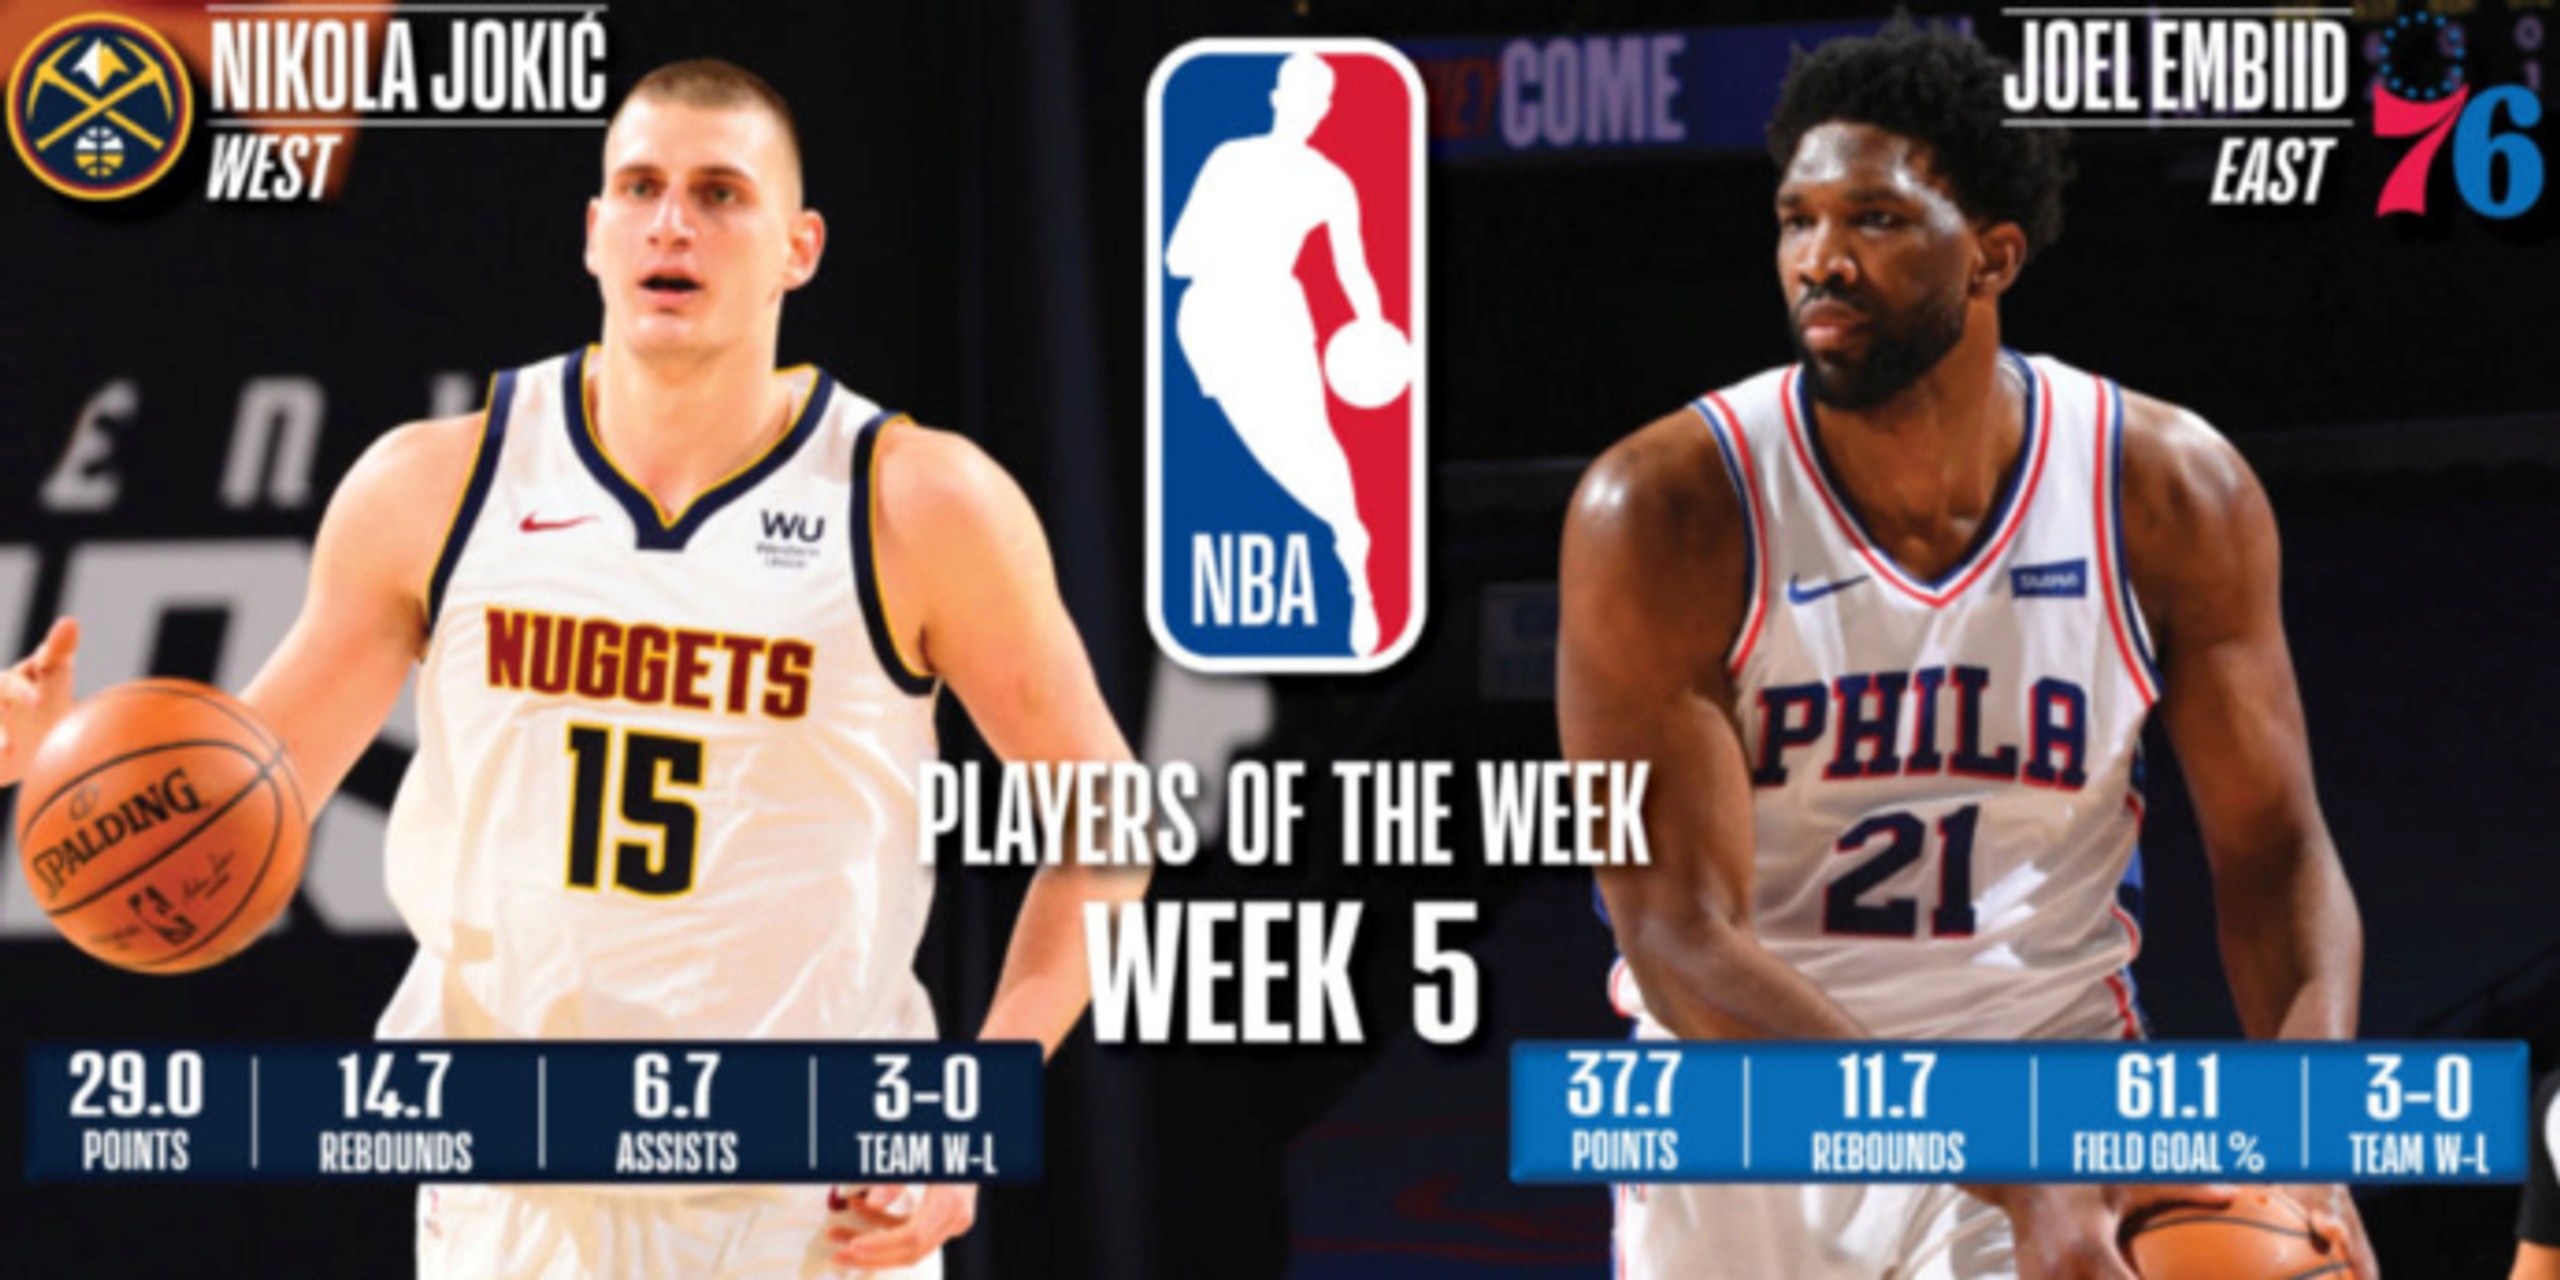 Embiid, Jokic earn NBA Player of the Week honors for Jan. 18-24